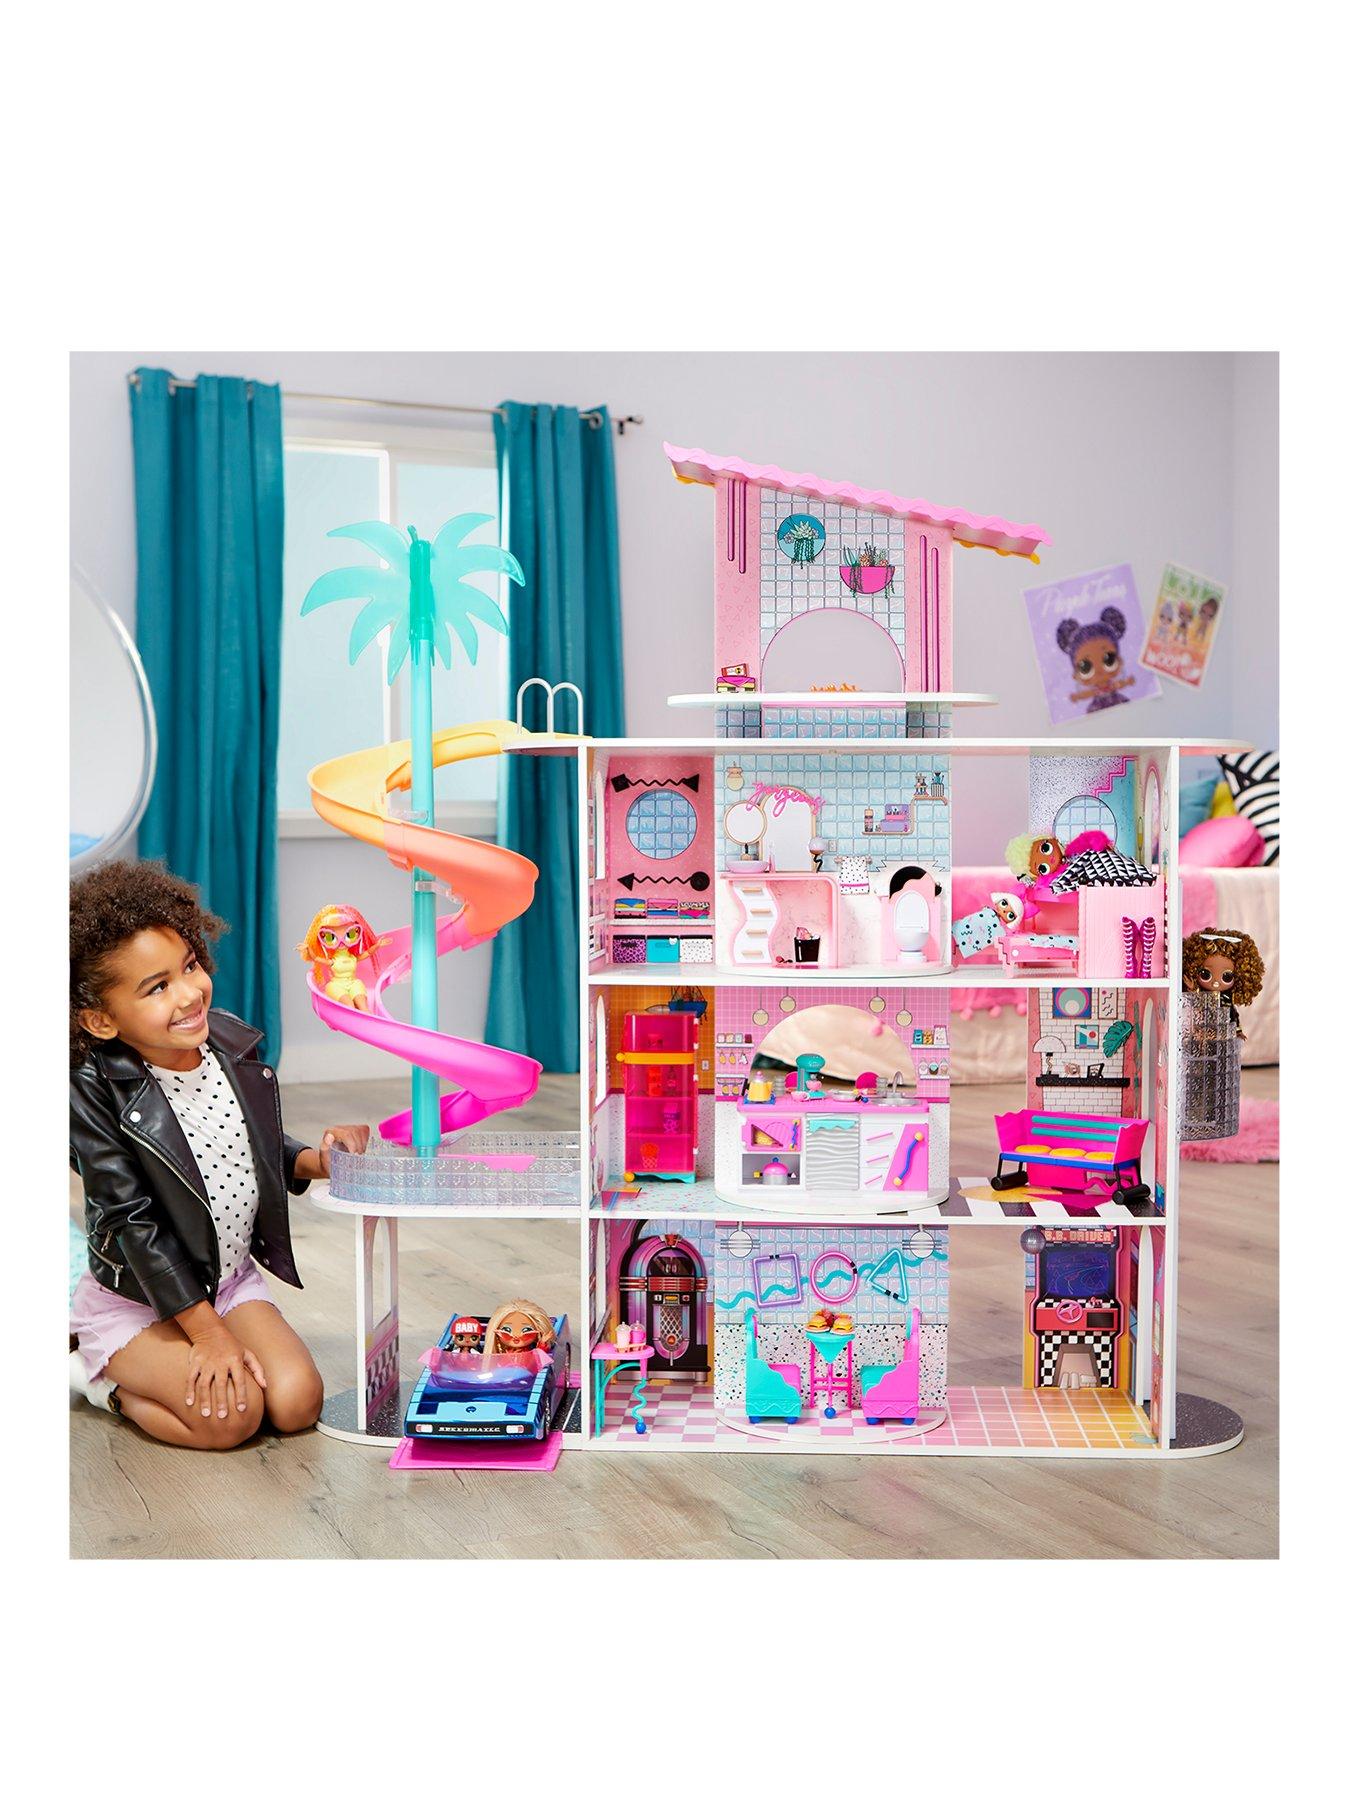 LOL Surprise OMG House of Surprises Doll House with 85+ Surprises